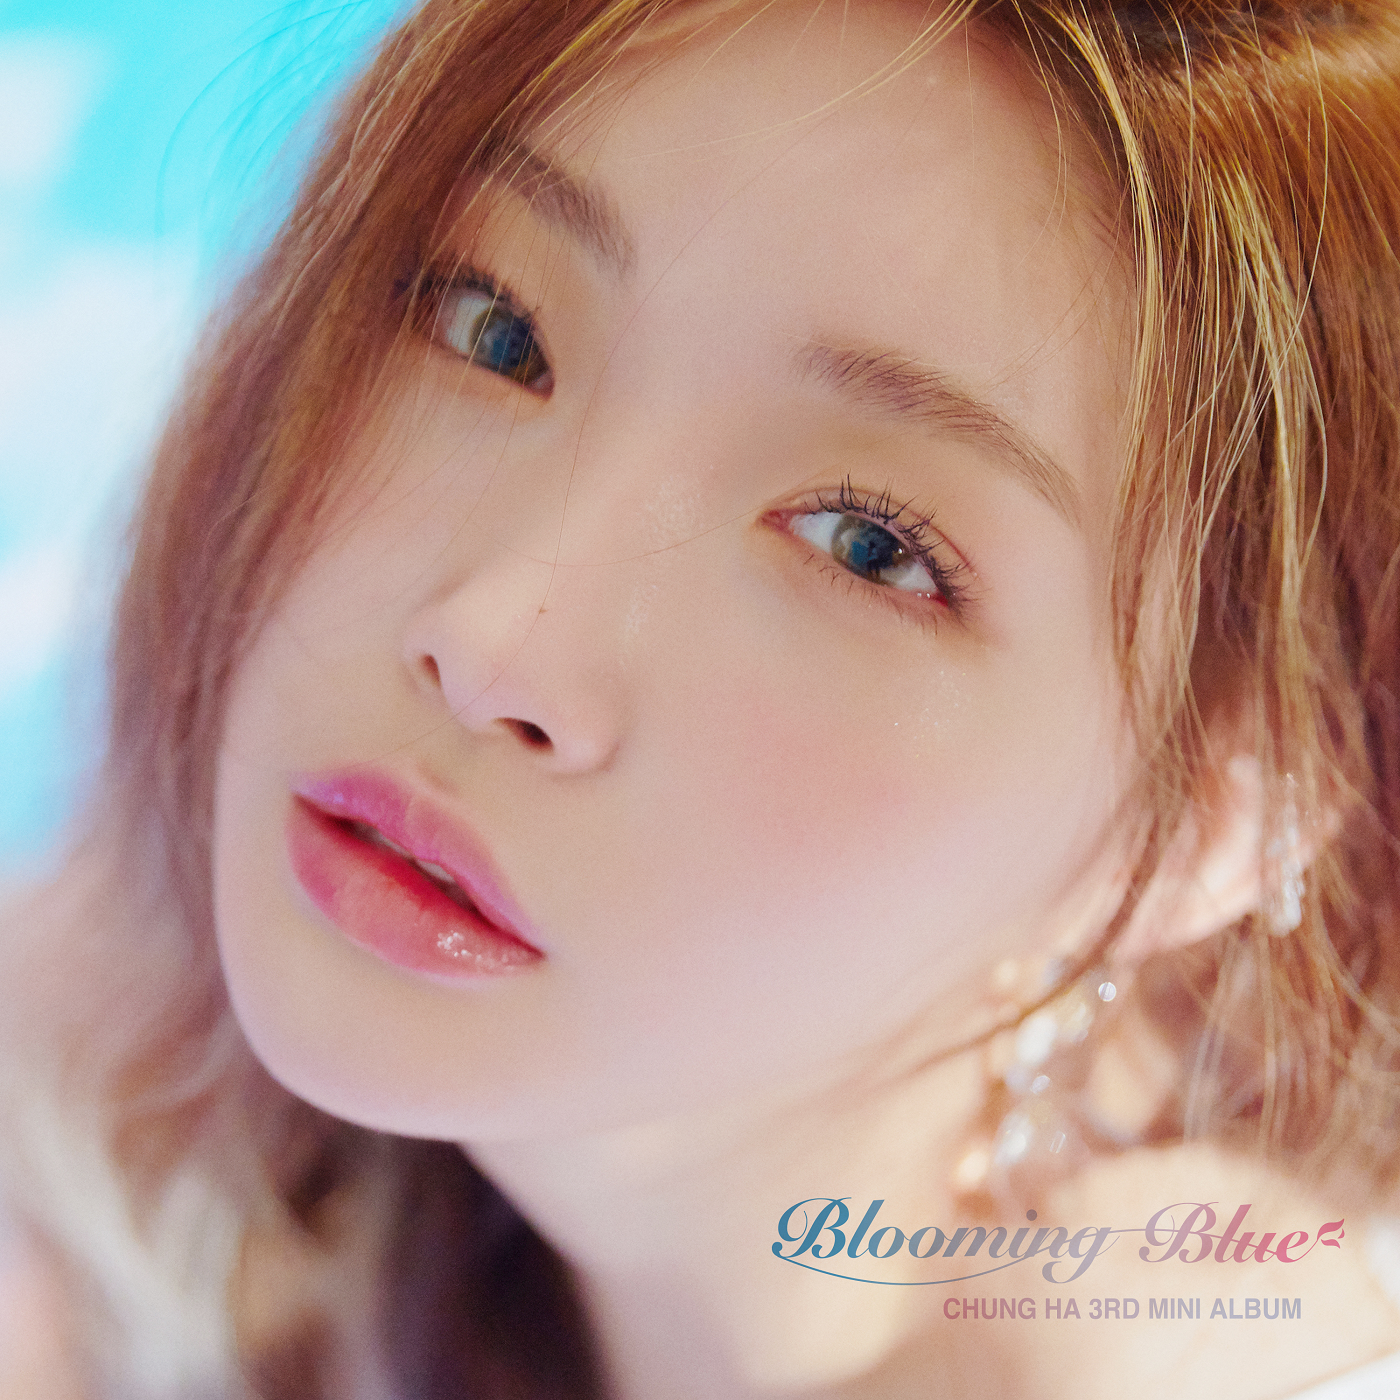 https://static.wikia.nocookie.net/kpop/images/b/b4/Chungha_Blooming_Blue_digital_album_cover.png/revision/latest?cb=20180718194201